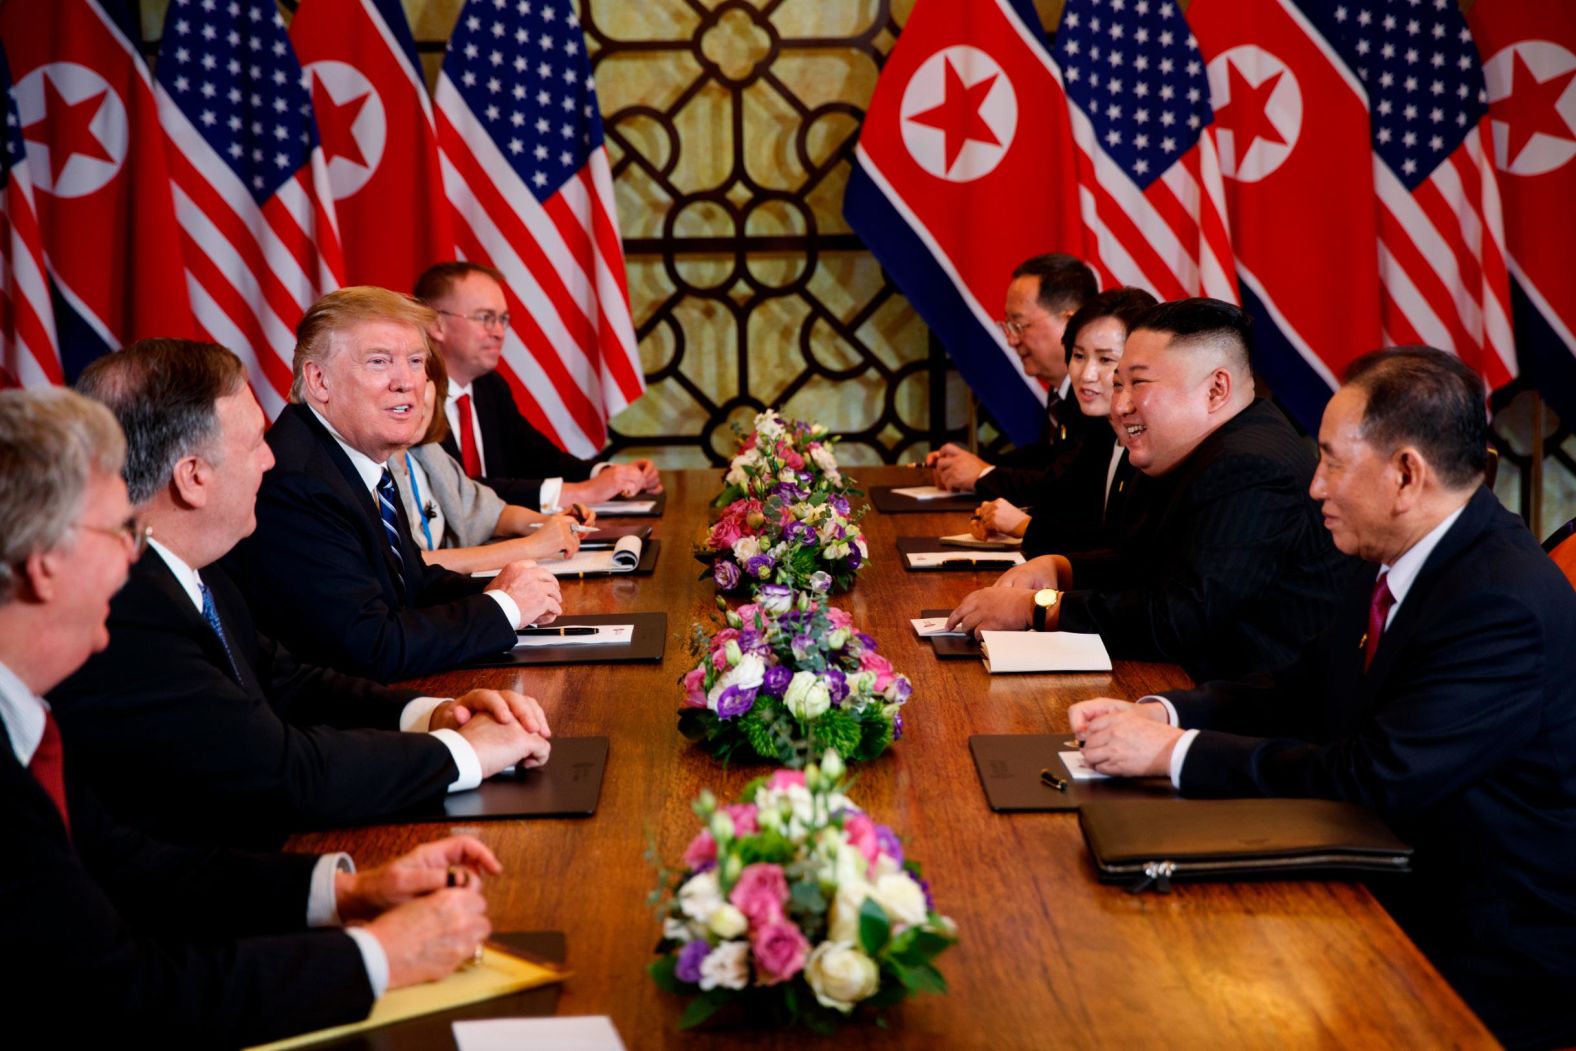 Trump and Kim, joined by members of their delegations, <a href="index.php?page=&url=https%3A%2F%2Fwww.cnn.com%2Fpolitics%2Flive-news%2Ftrump-kim-jong-un-summit-vietnam-february-2019%2Fh_a160081d43d542065754e17c7c3d8ace" target="_blank">take questions from reporters</a> before sitting down for talks on February 28. "We're having very, very productive discussions," Trump said.